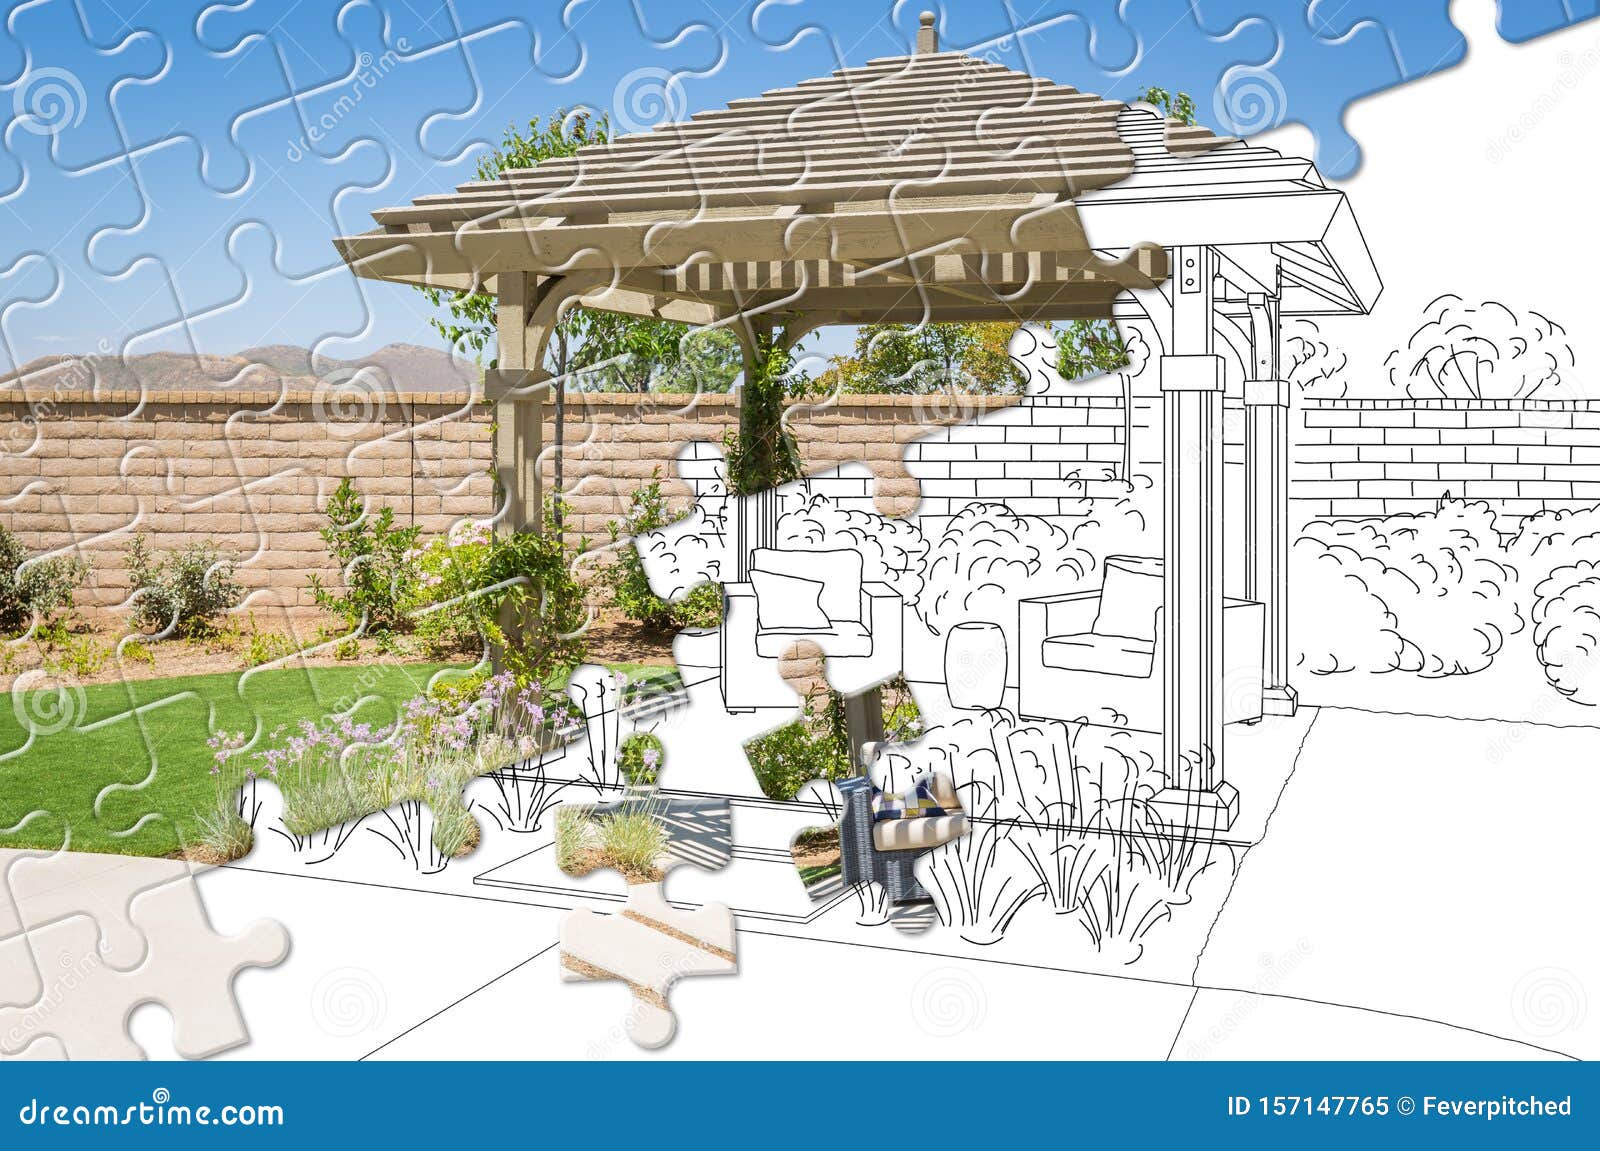 puzzle pieces fitting together revealing finished pergola gazebo build over drawing